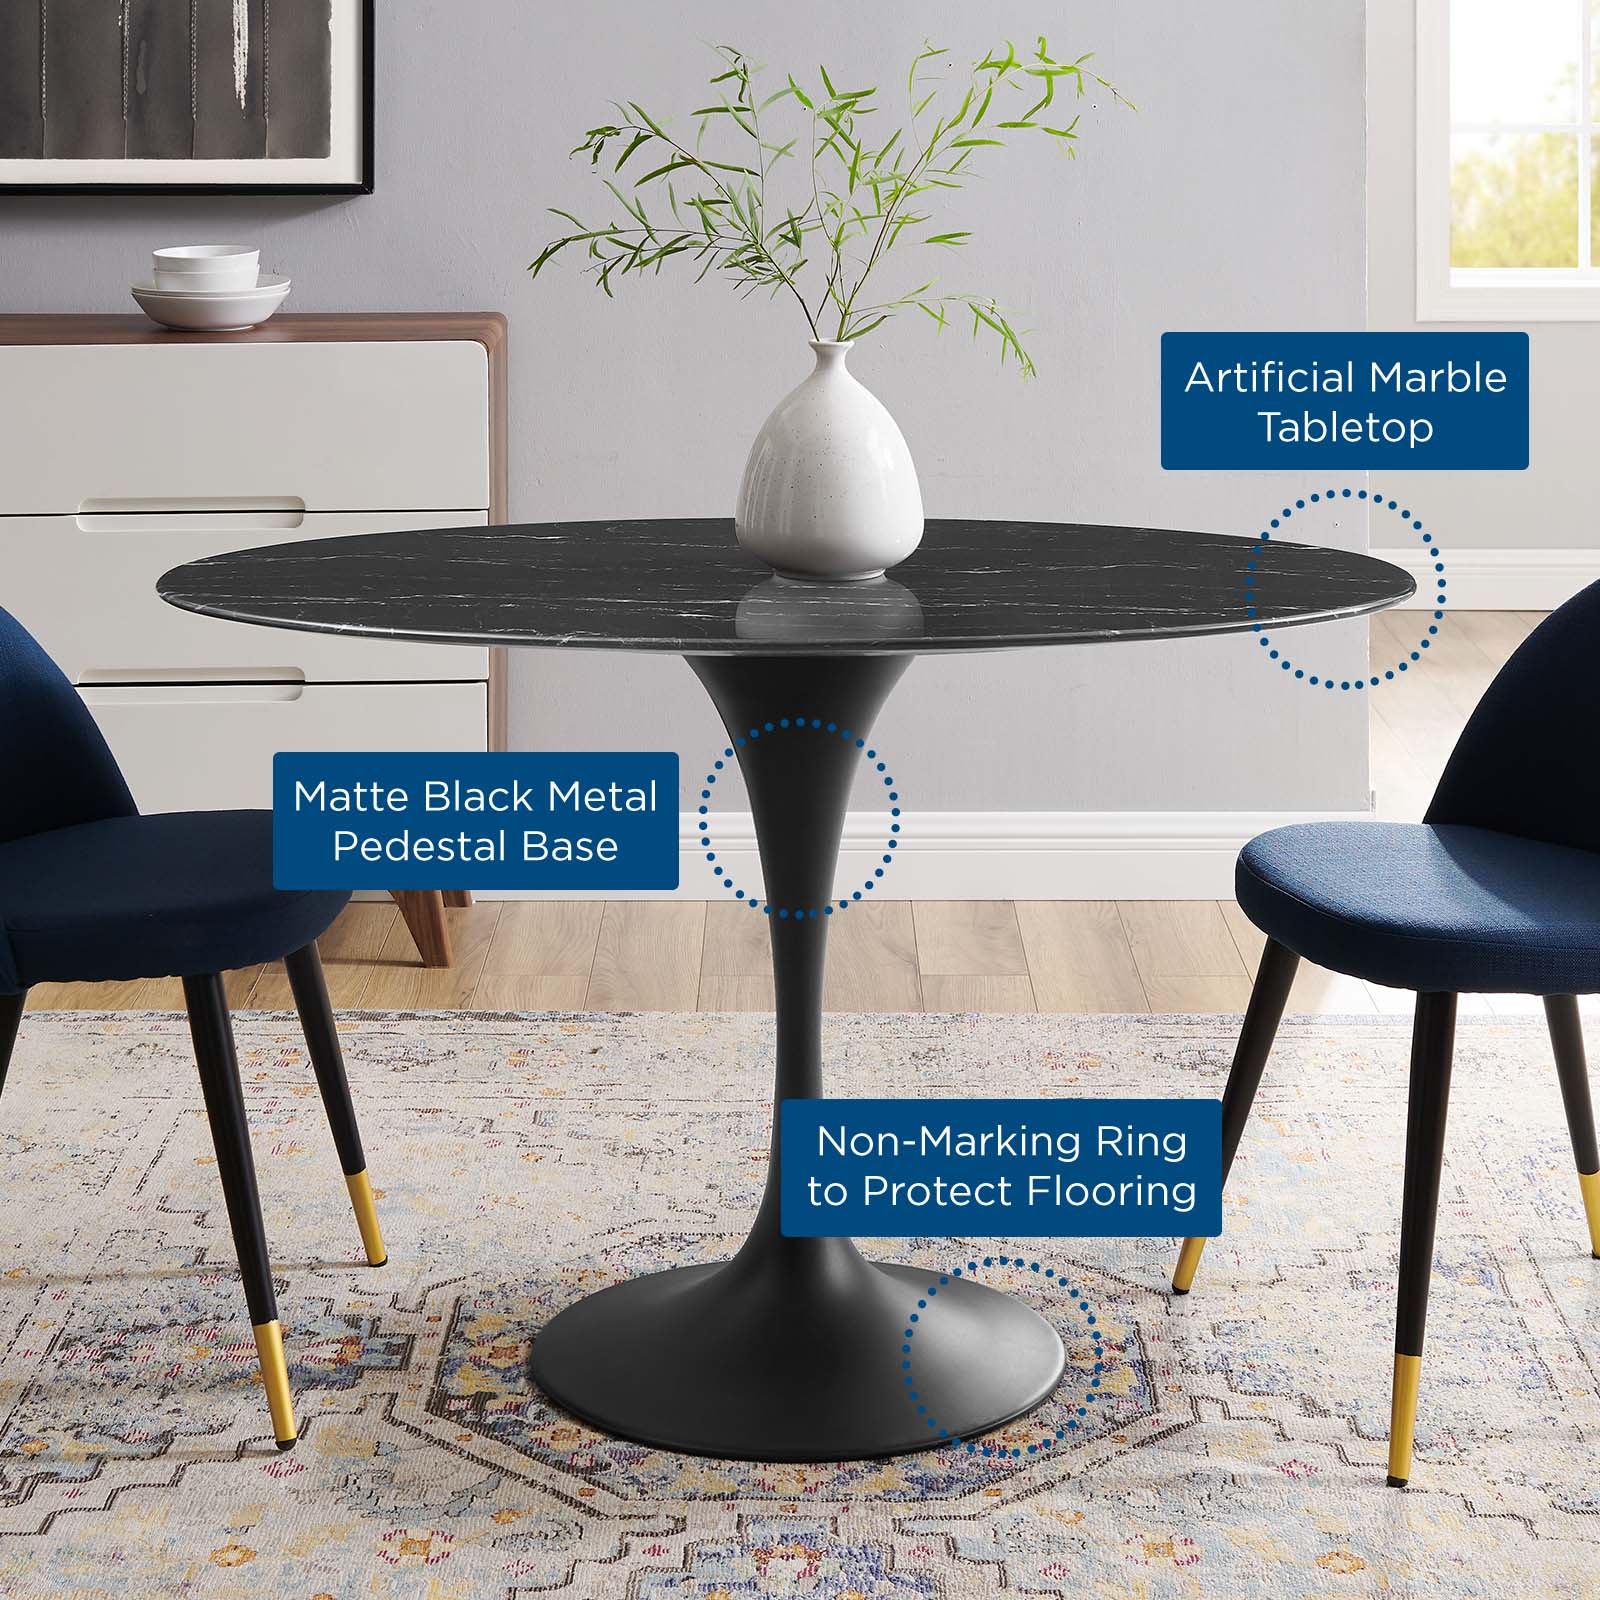 Lippa 48" Artificial Marble Dining Table - East Shore Modern Home Furnishings